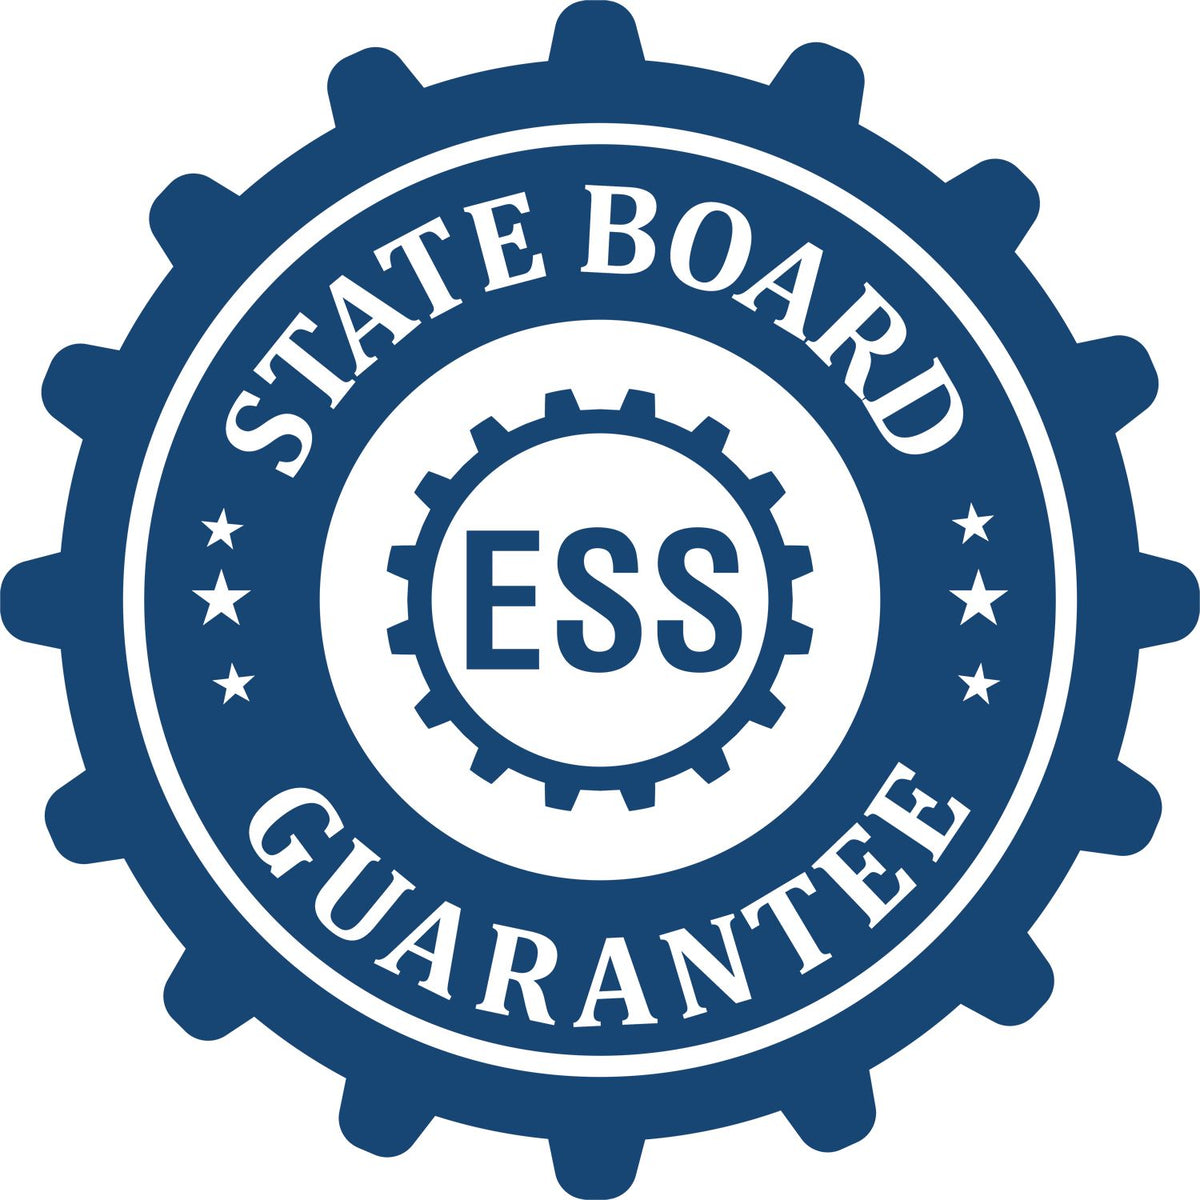 An emblem in a gear shape illustrating a state board guarantee for the Heavy-Duty Oregon Rectangular Notary Stamp product.